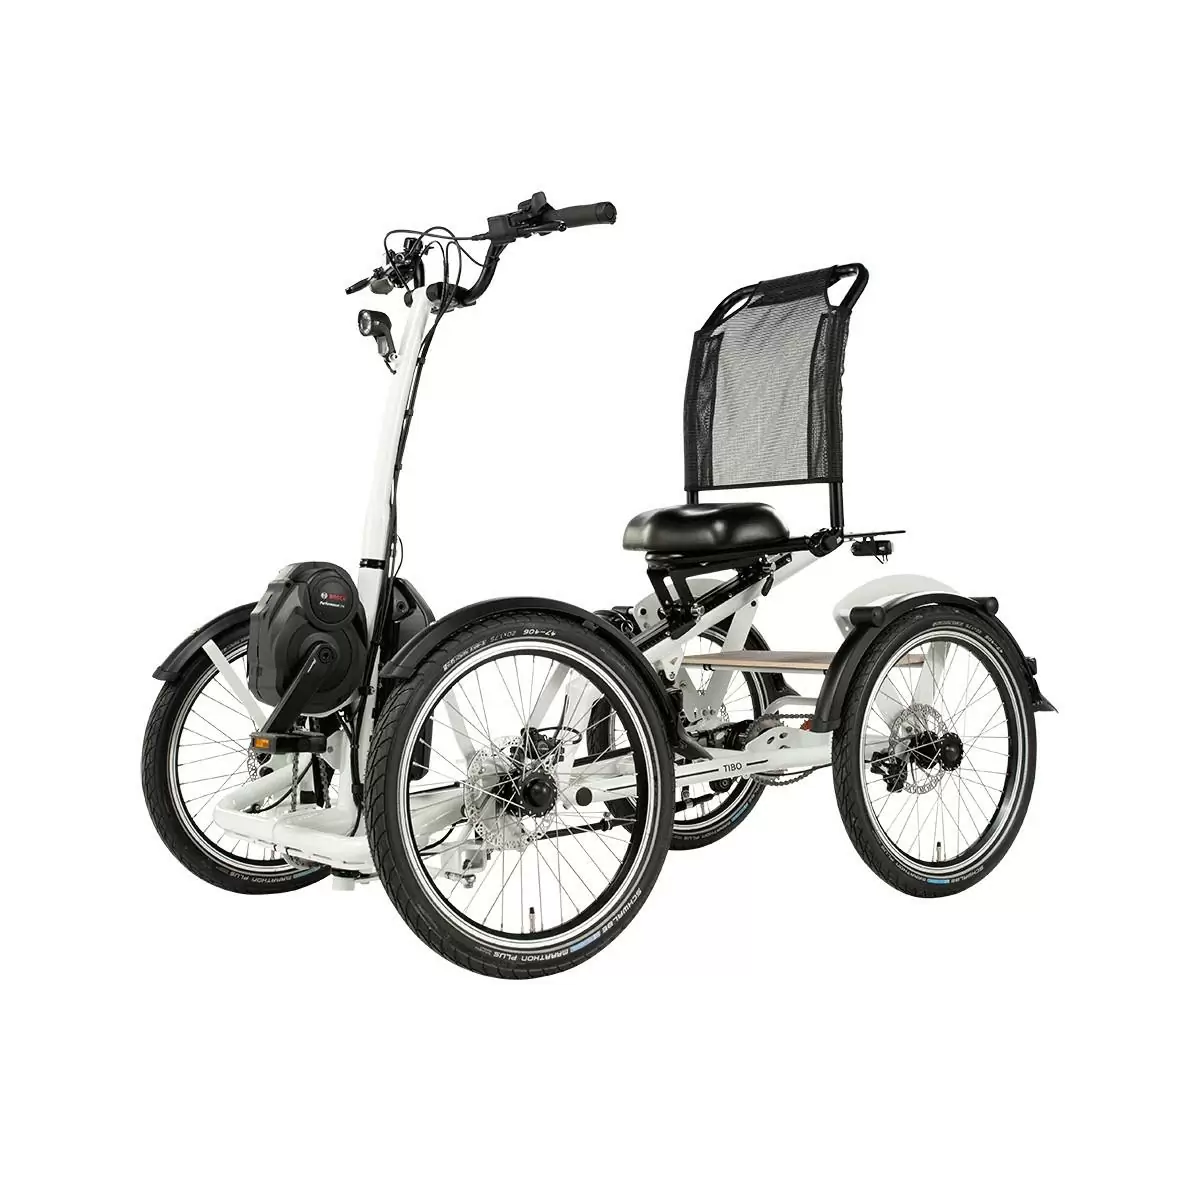 Tibo 20'' 8v 500Wh Bosch Performance Electric Quadcycle Gray One Size #1